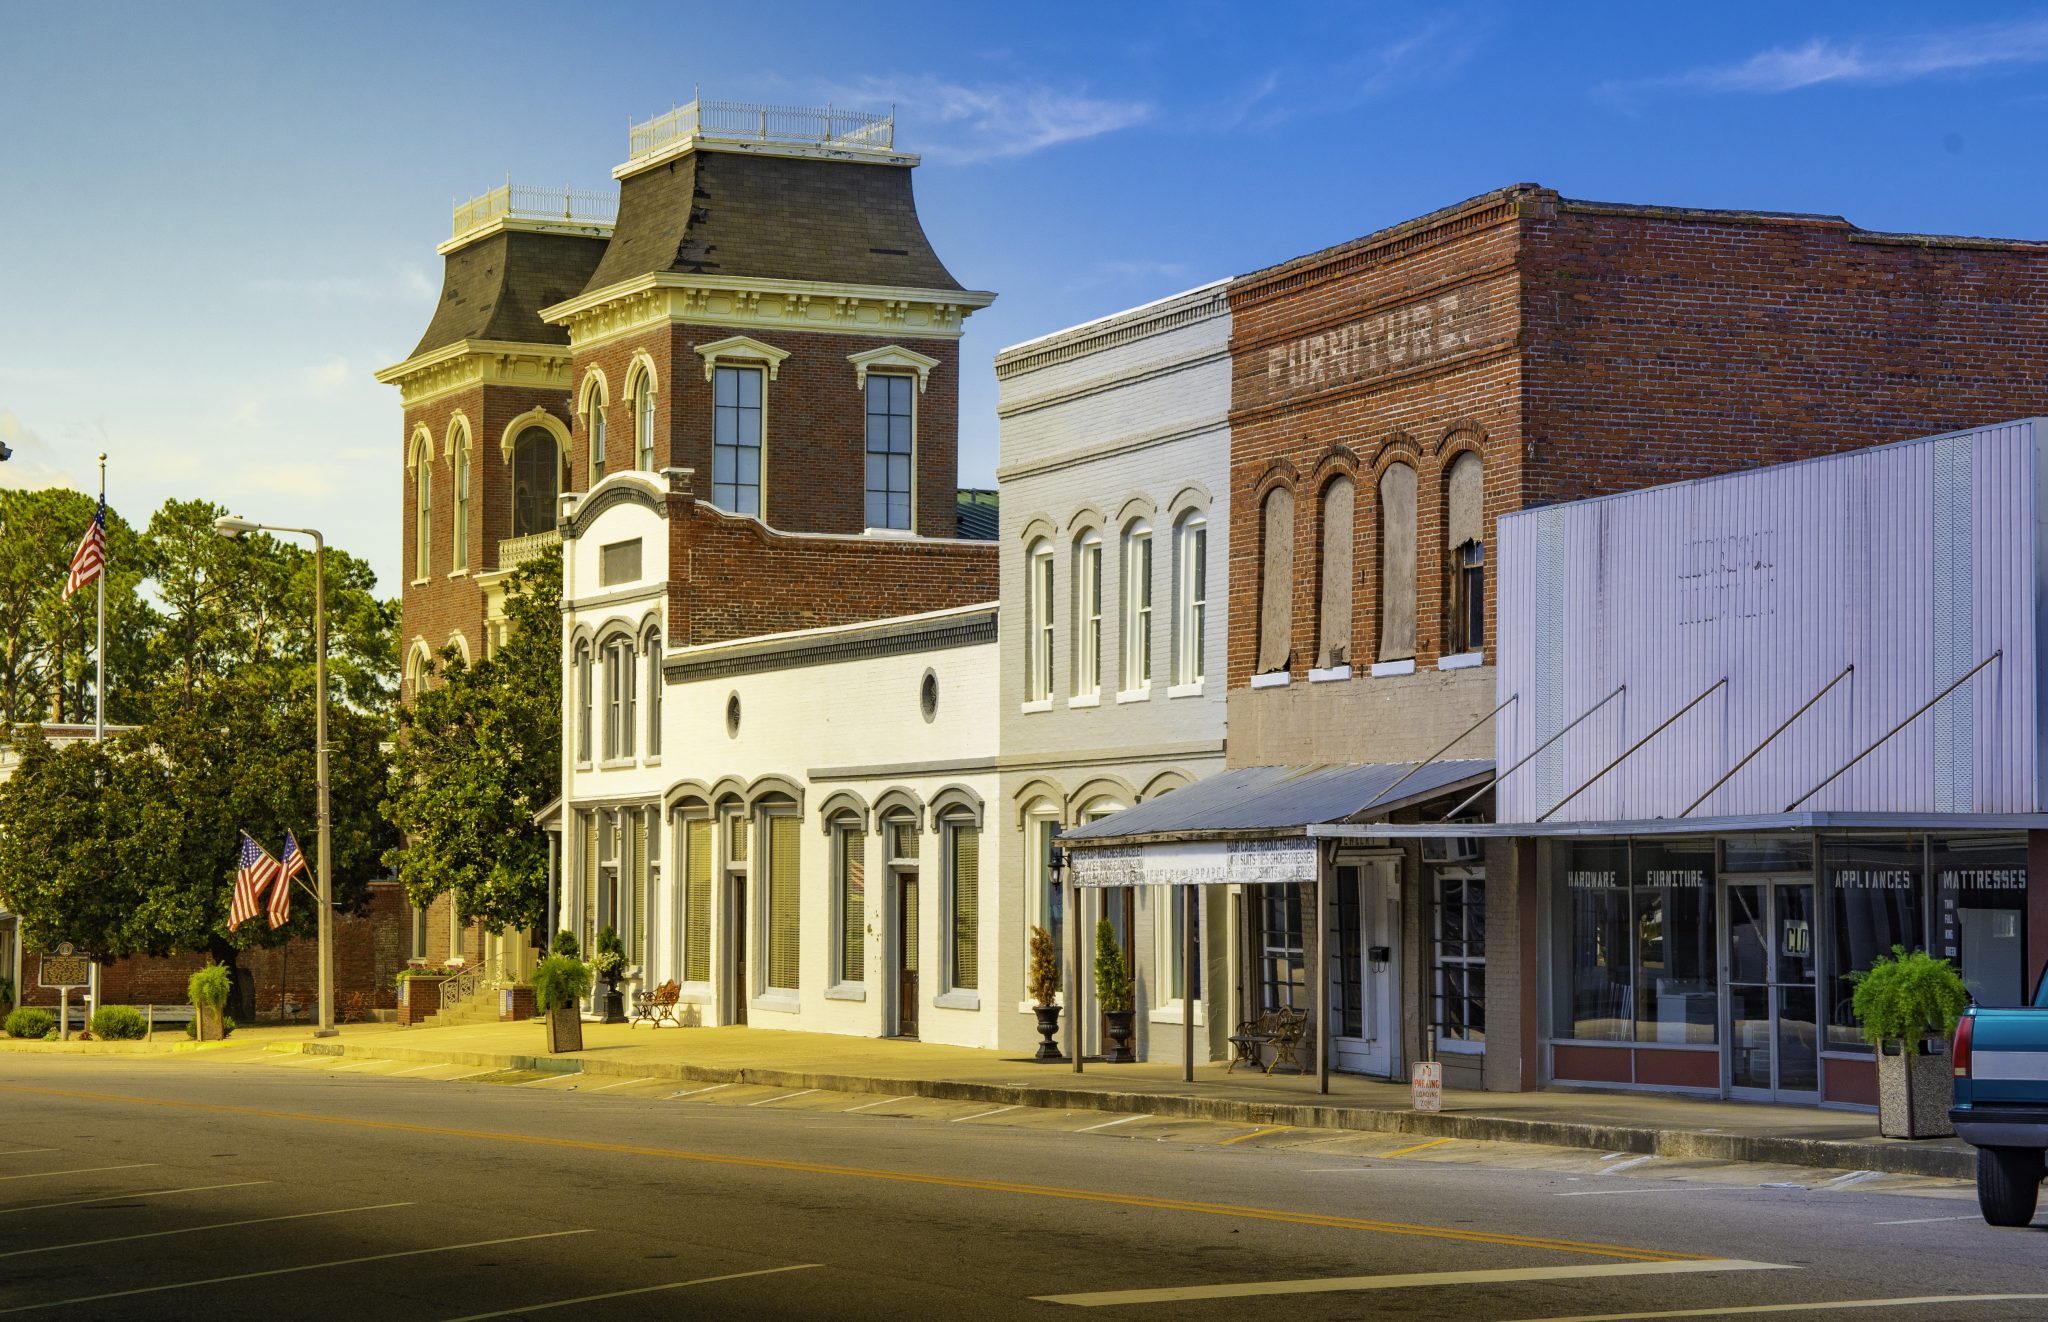 Downtown Union Springs, Alabama, where ALProHealth has a presence to help improve.